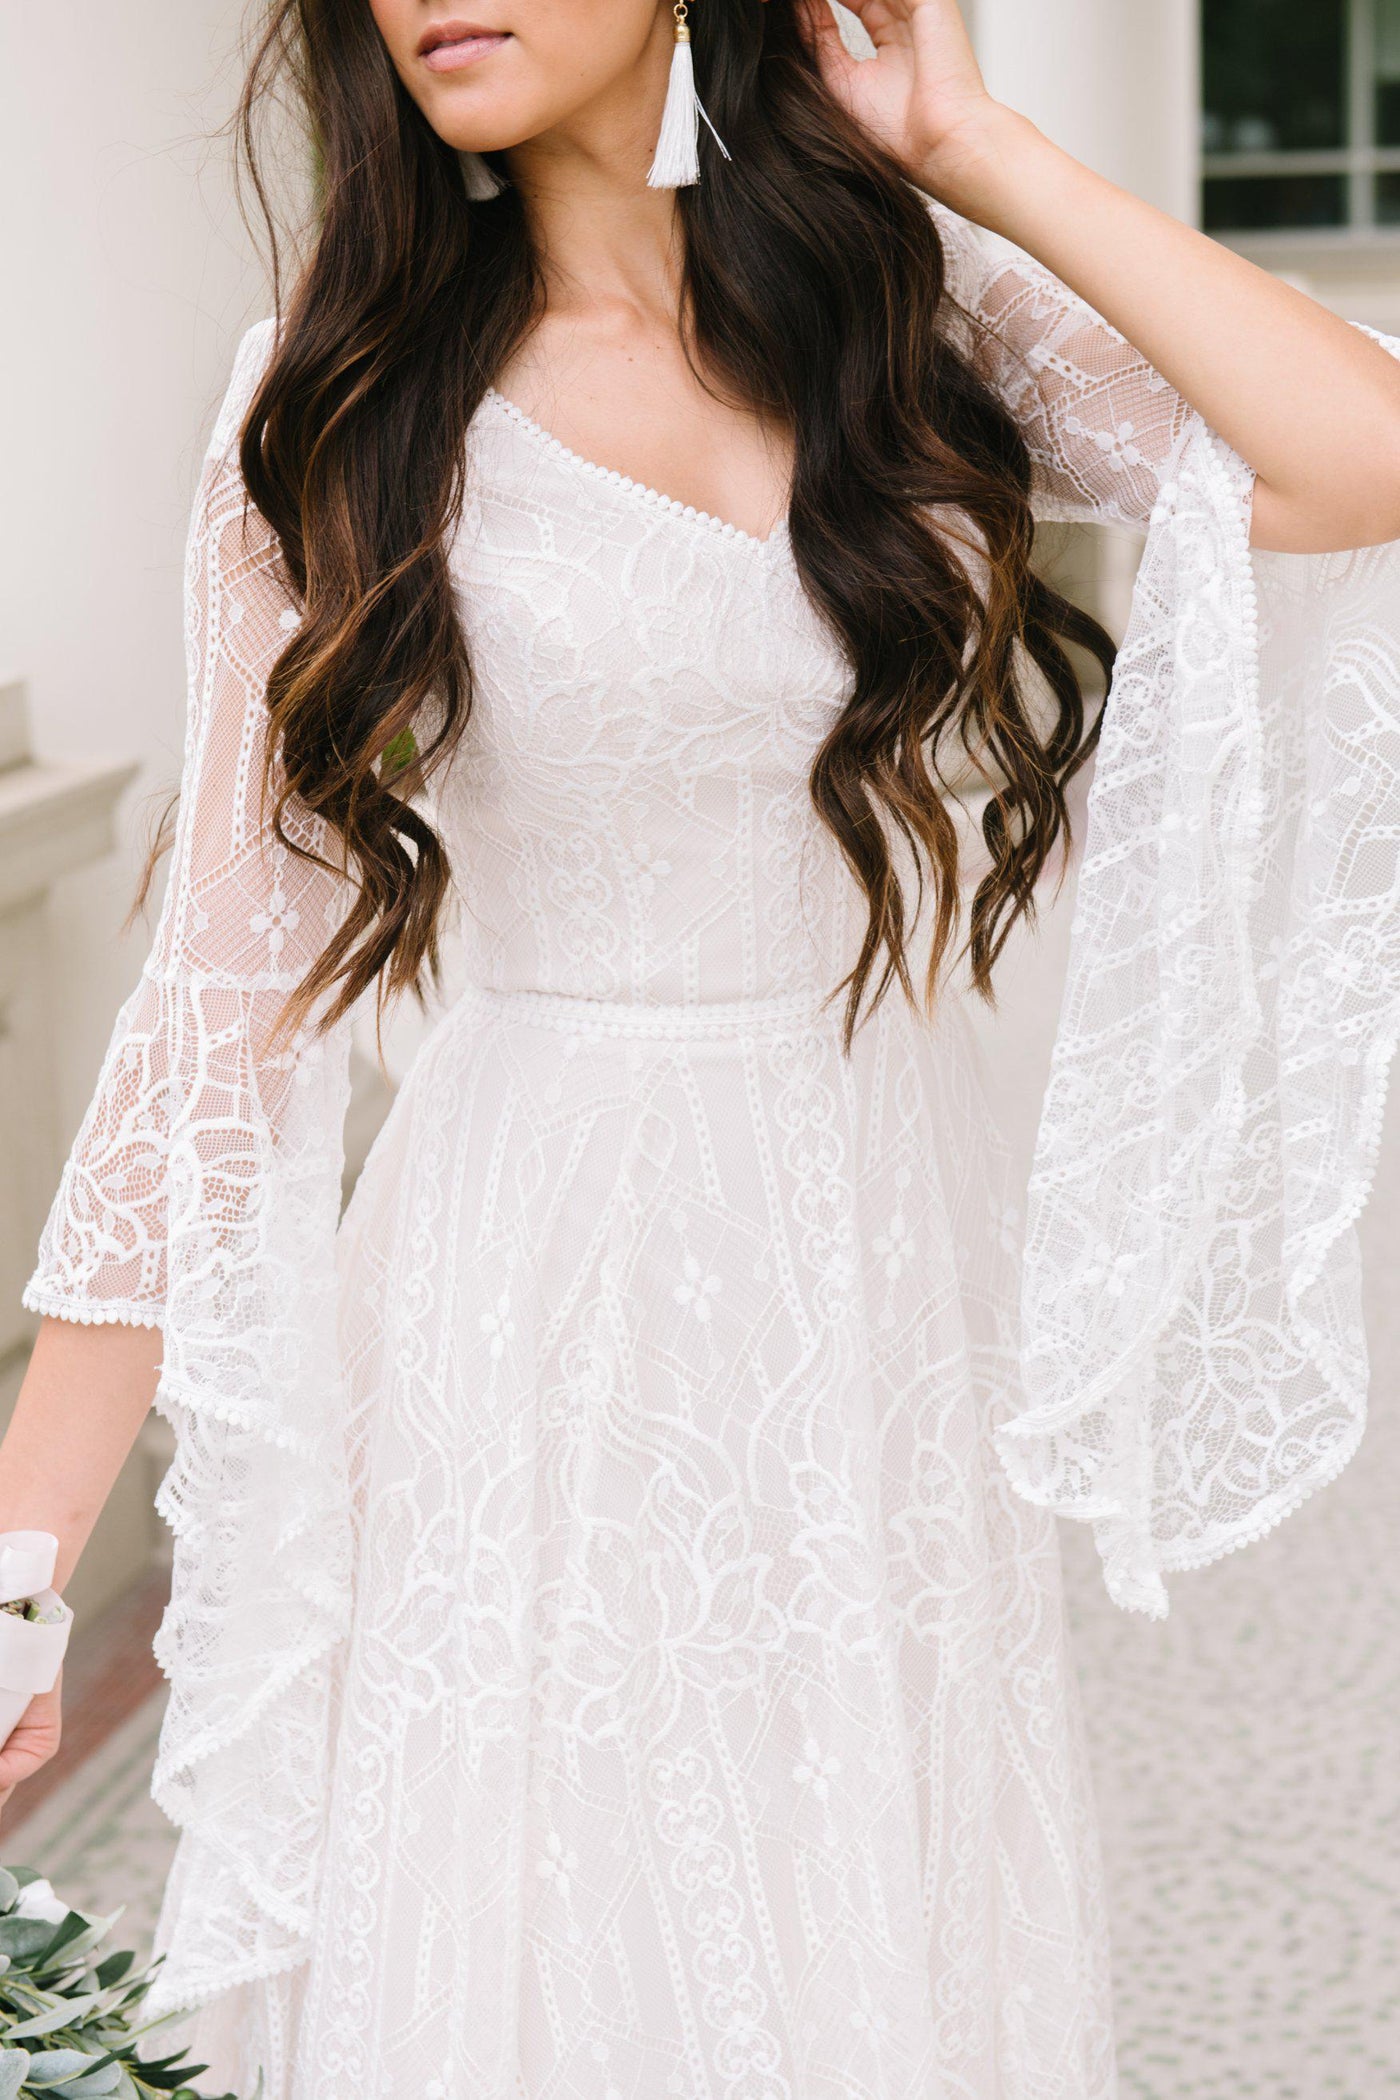 Modest wedding dress, Soft a-line laced dress with quarterly length flowing sleeves from salt lake city utah bridal shop